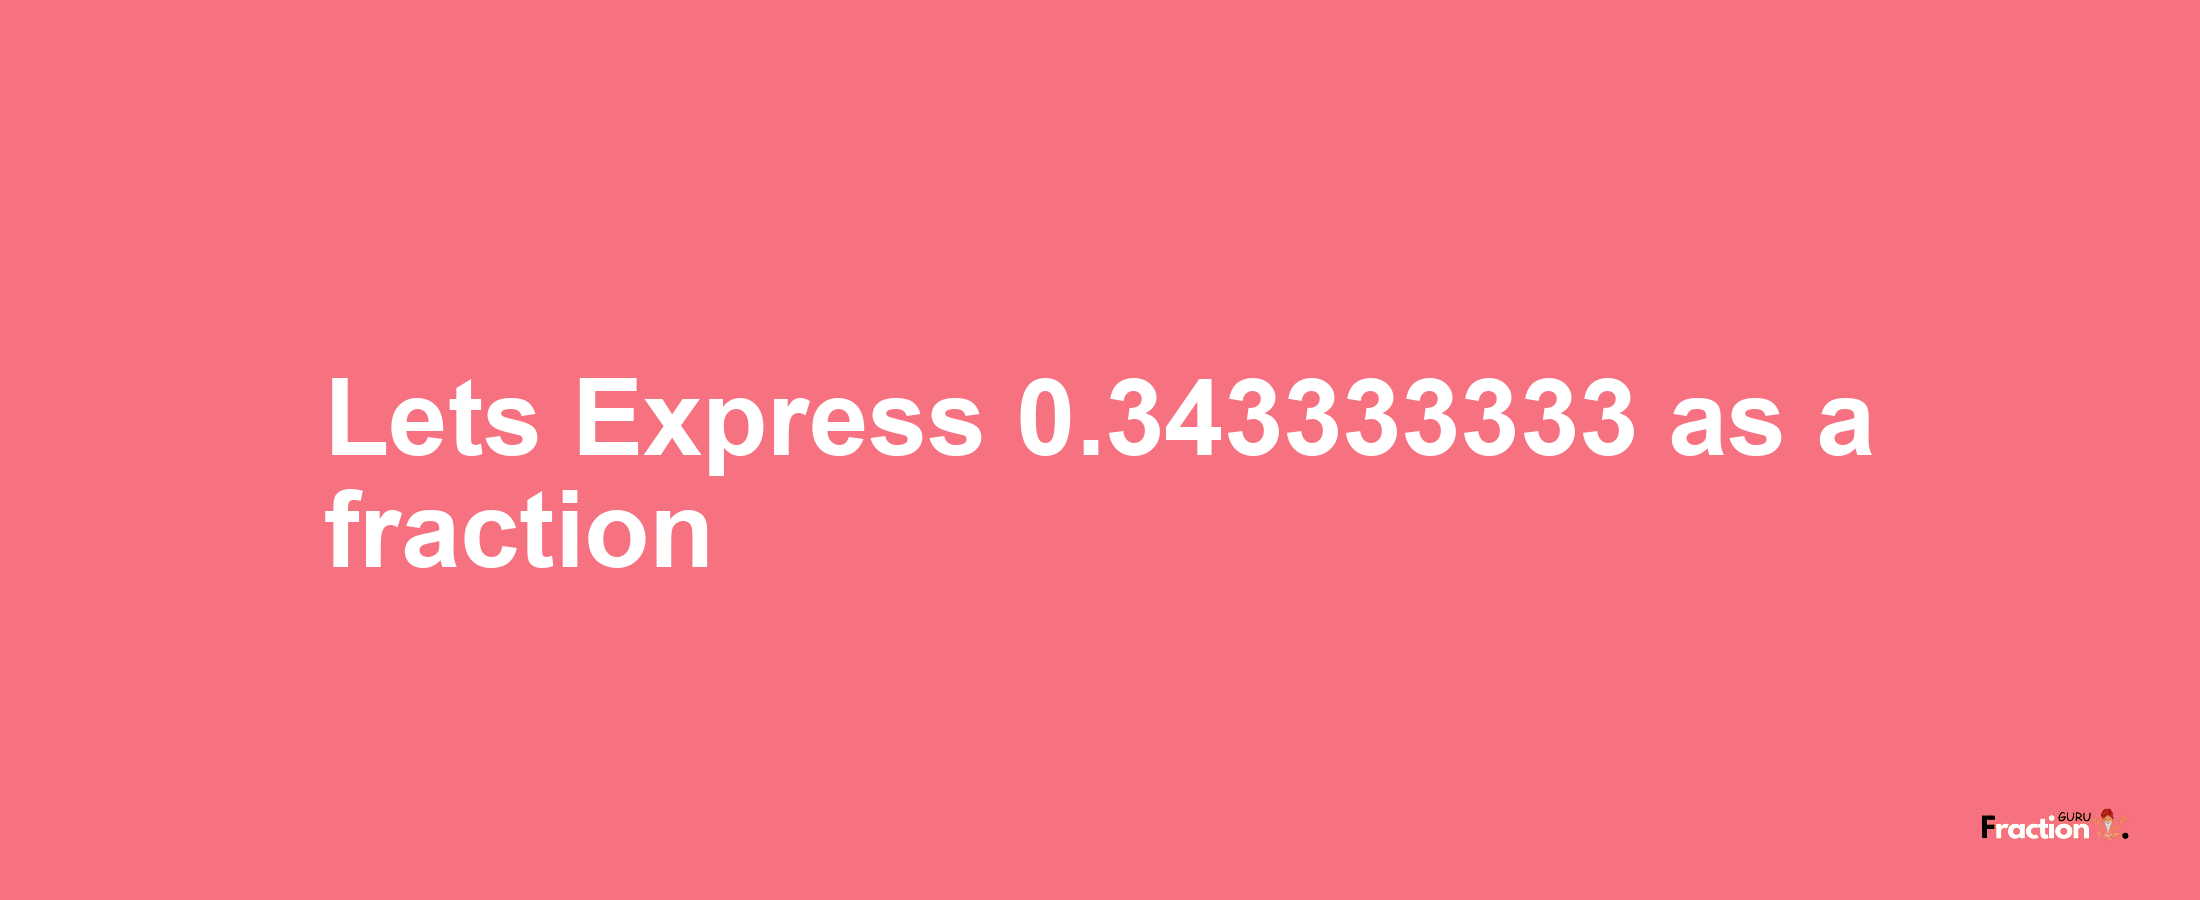 Lets Express 0.343333333 as afraction